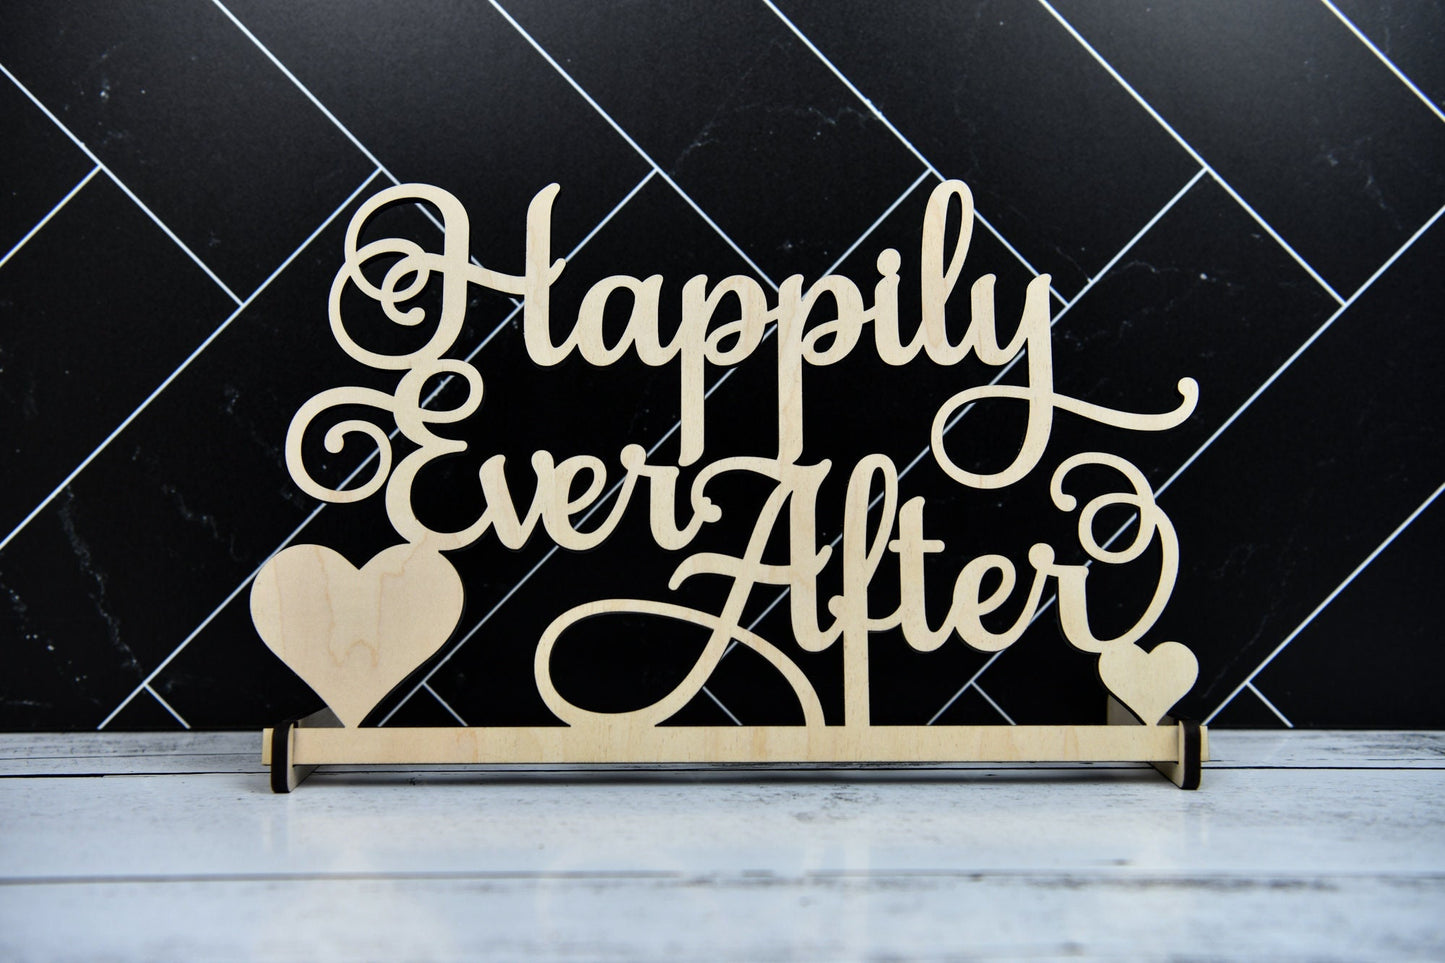 Happily Ever After Wood Sign, Script Wedding Table sign,  Custom Wedding table sign, Personalized Head Table sign Wood, Wedding Party Decor